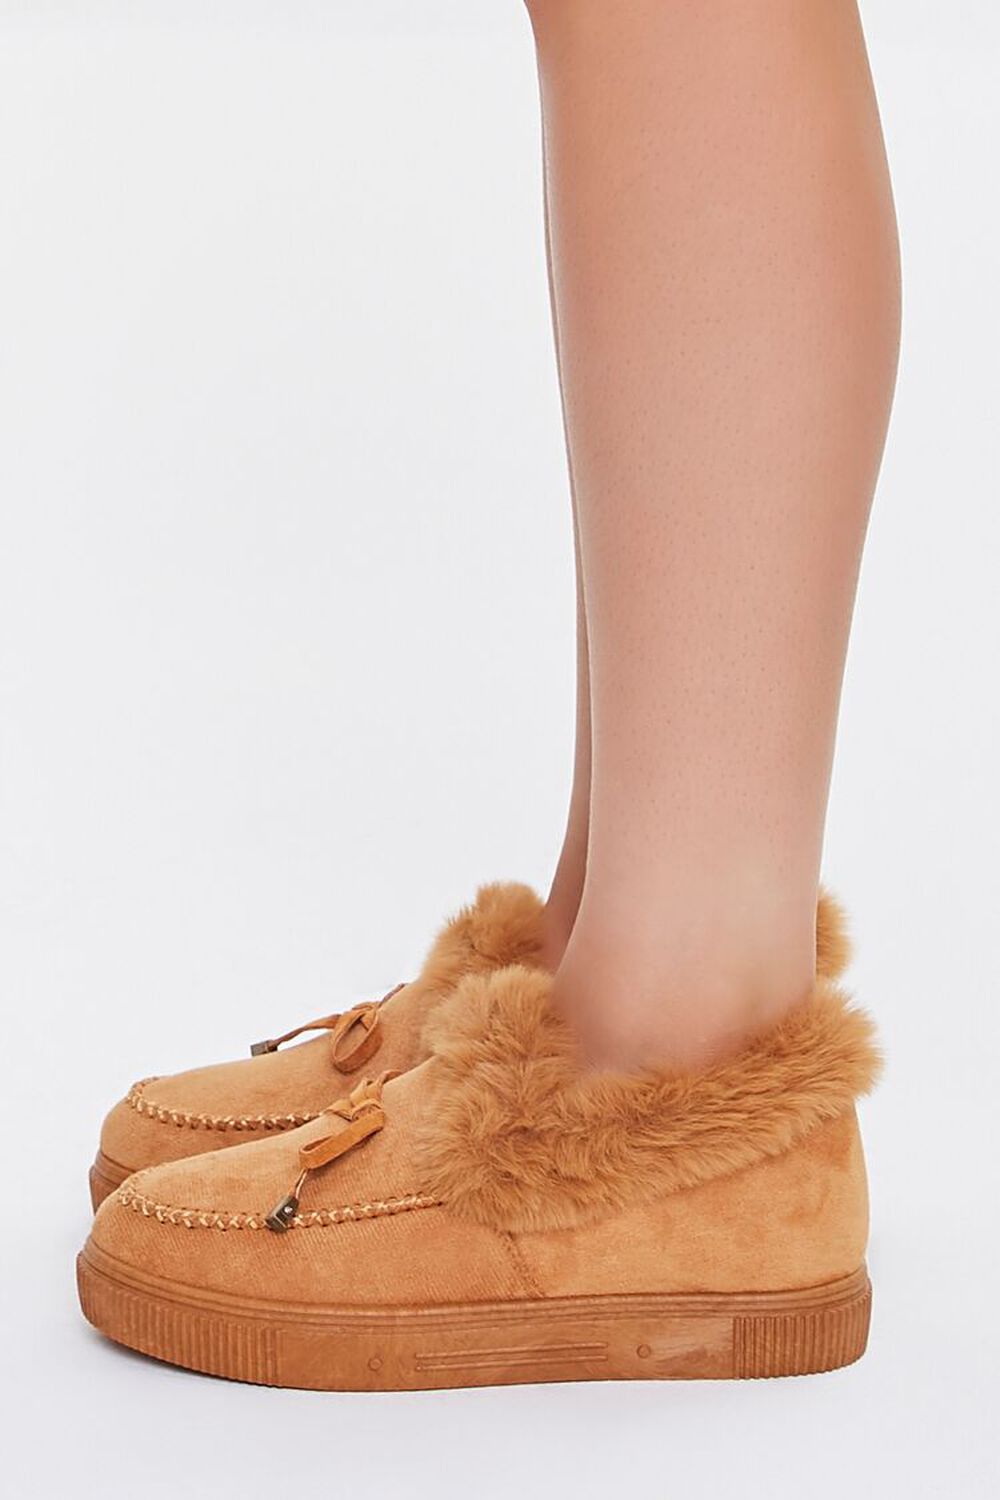 TAN Faux Suede Bow Loafers, image 2